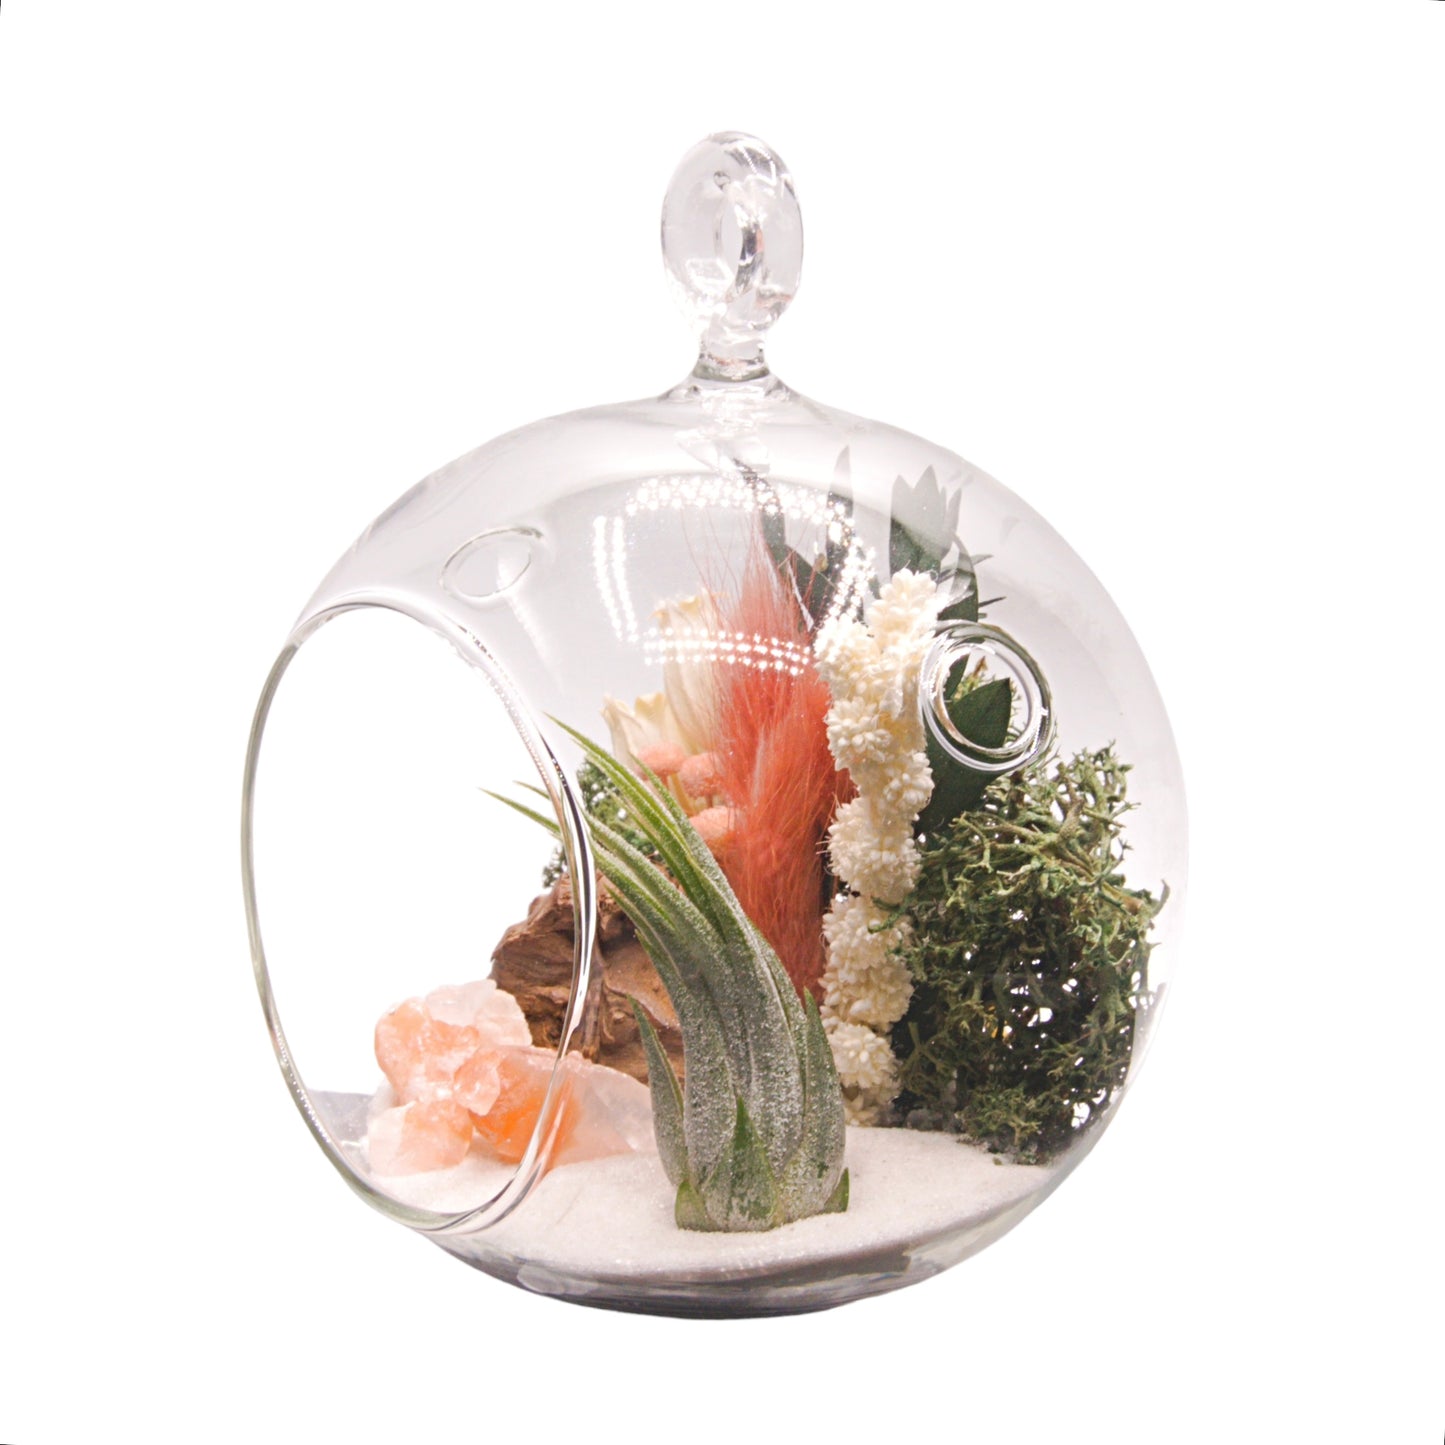 Glass bubble airplant terrarium with dried flowers and tri-coloured crystals